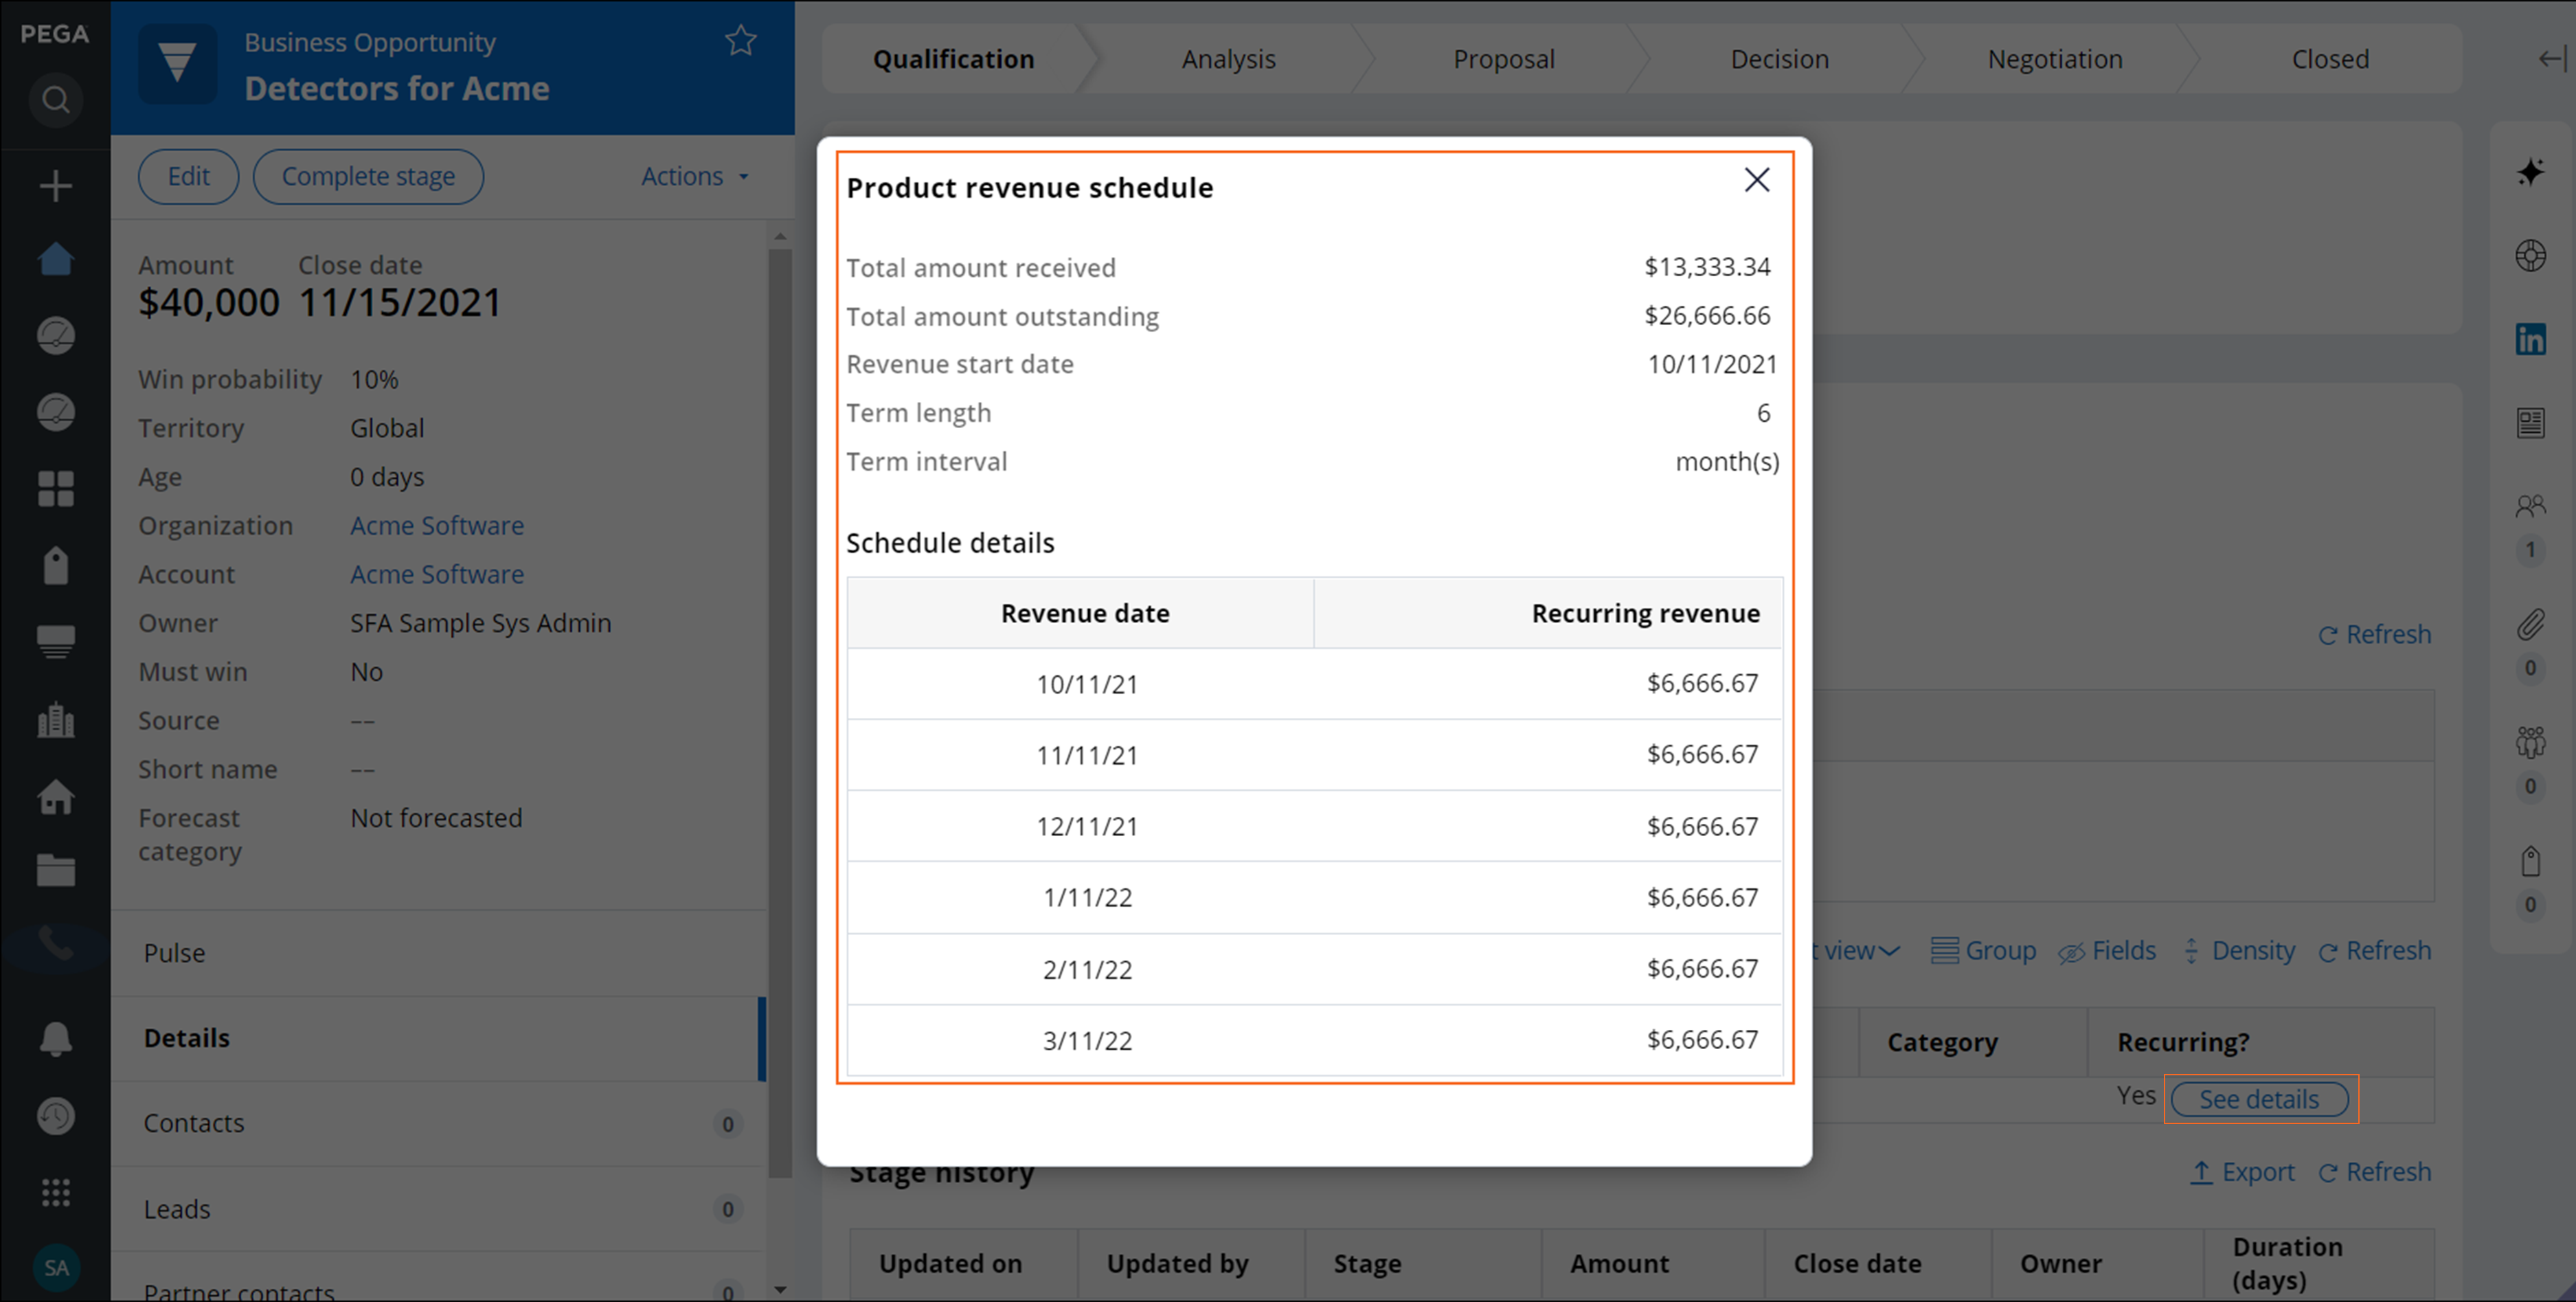 The Product revenue schedule dialog box with the details of the revenue schedule, including outstanding amount and payment dates.